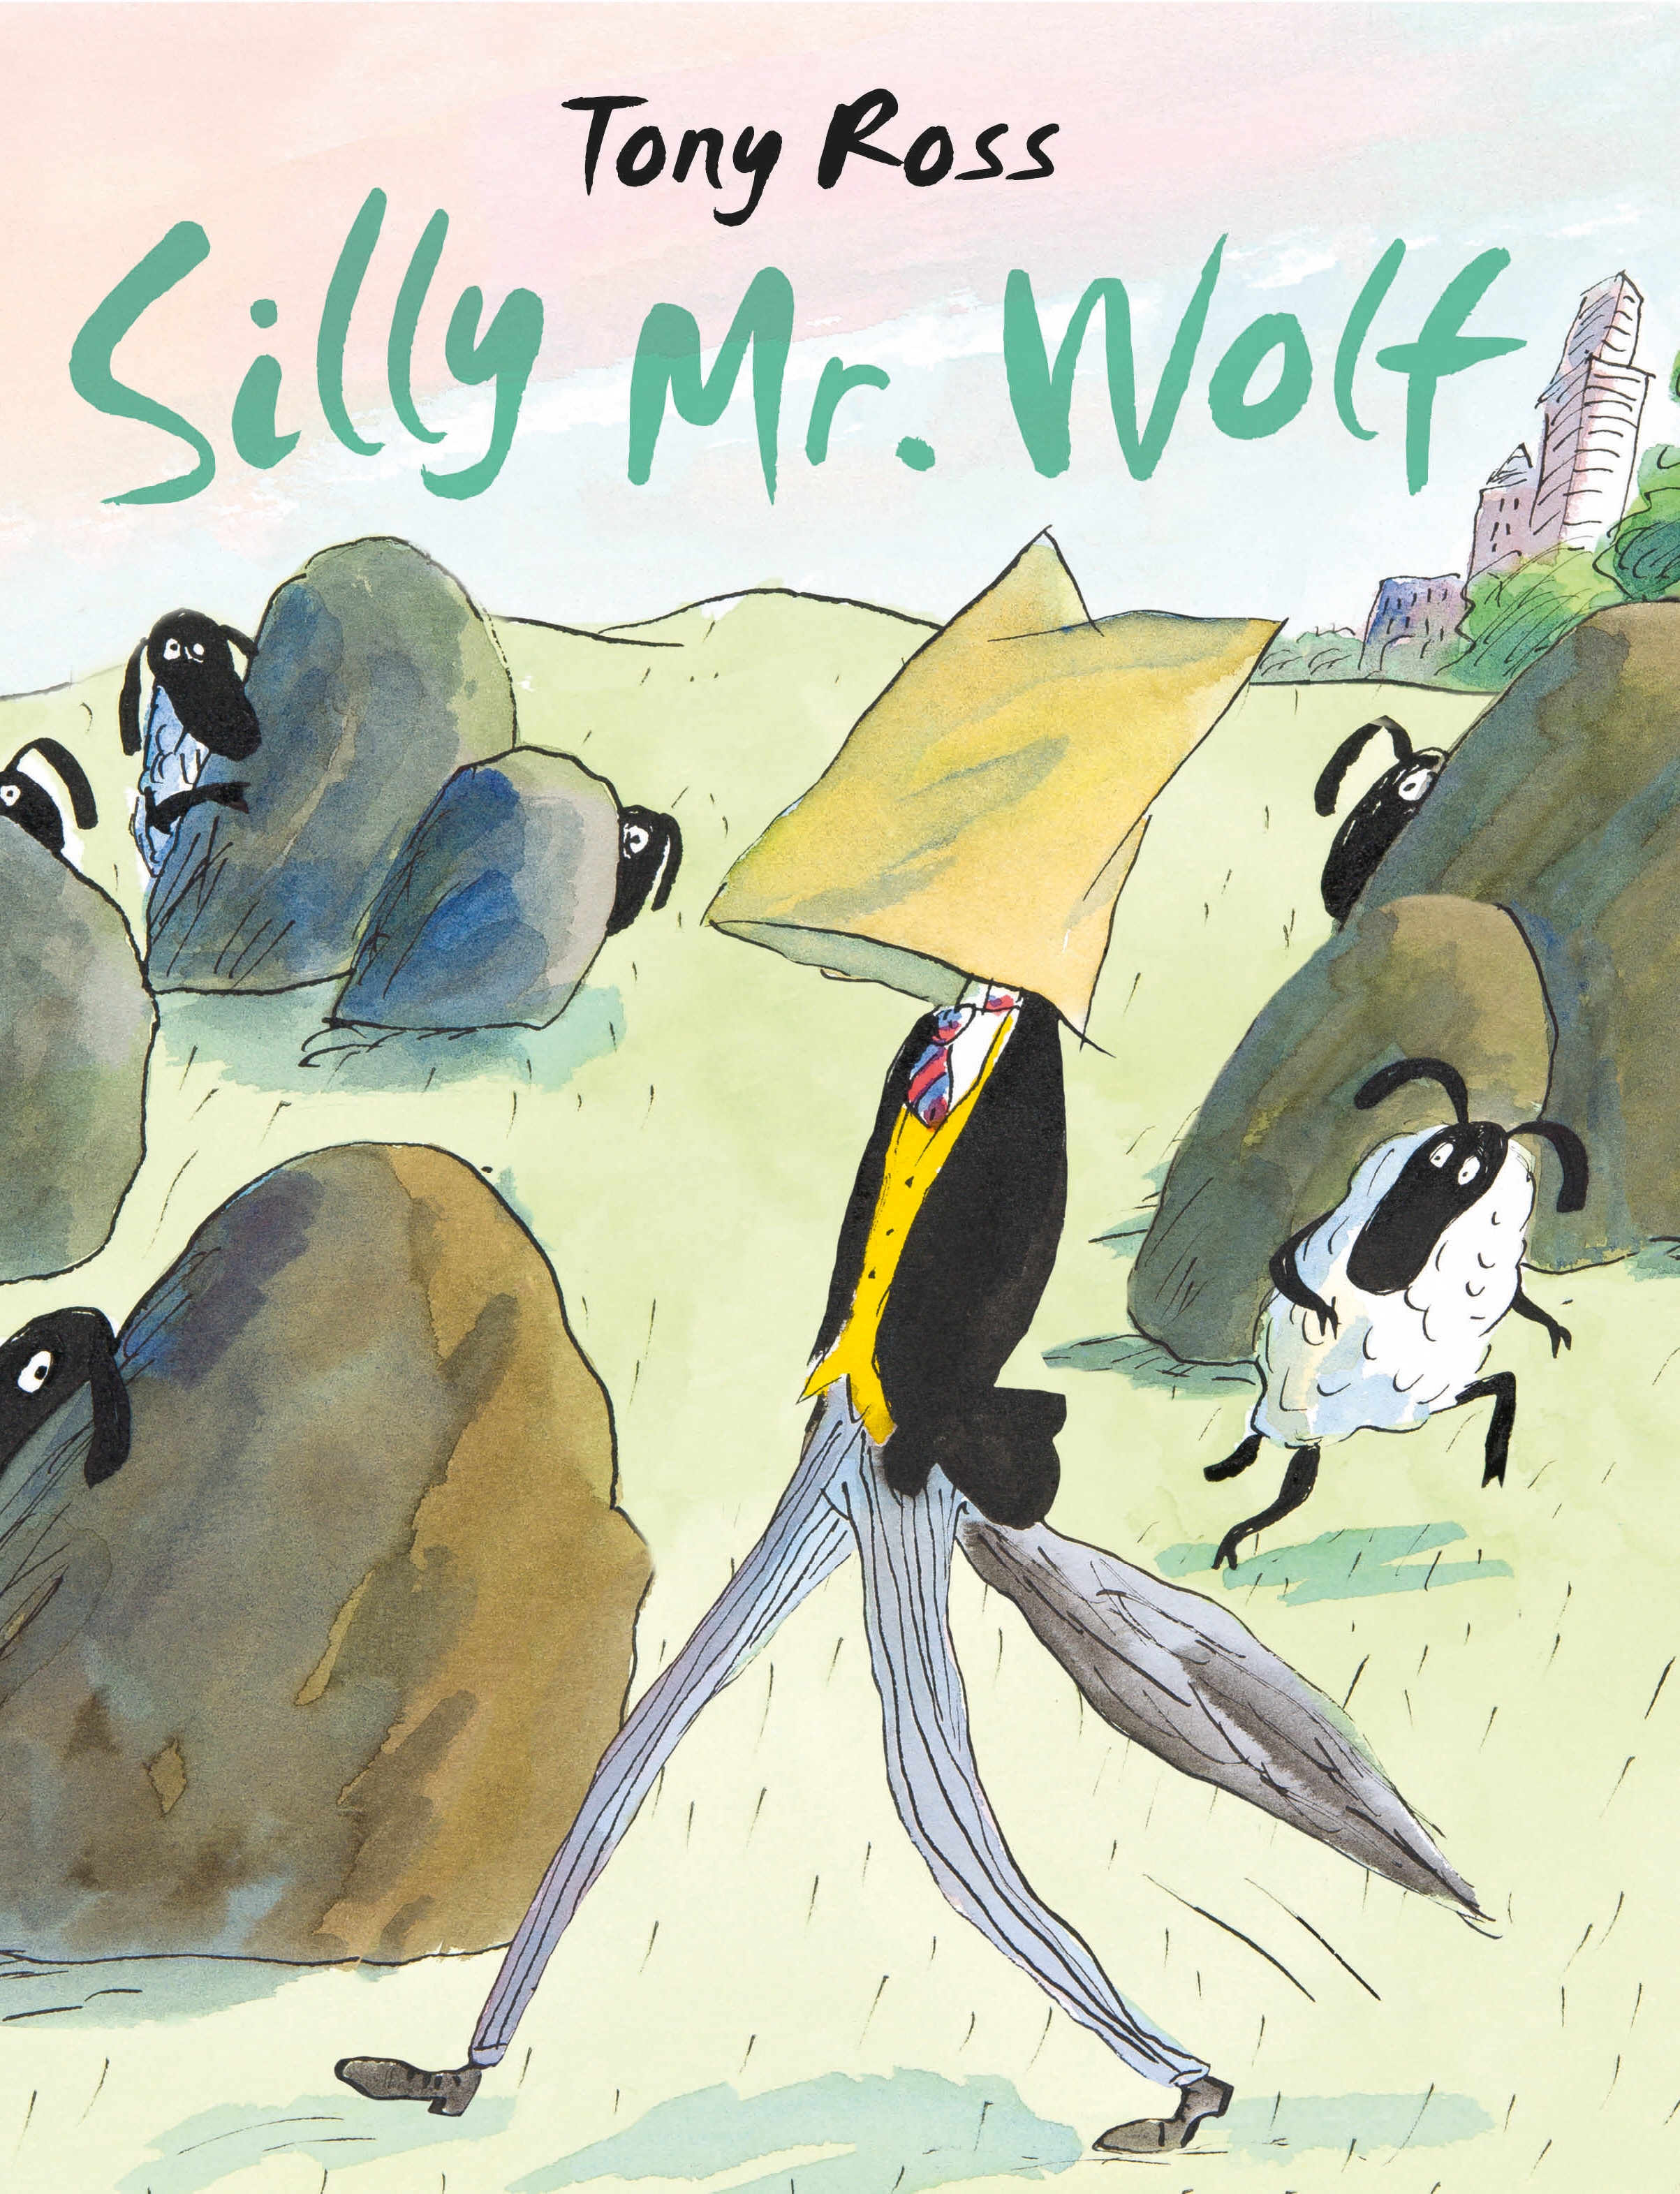 Book “Silly Mr Wolf” by Tony Ross — November 7, 2019